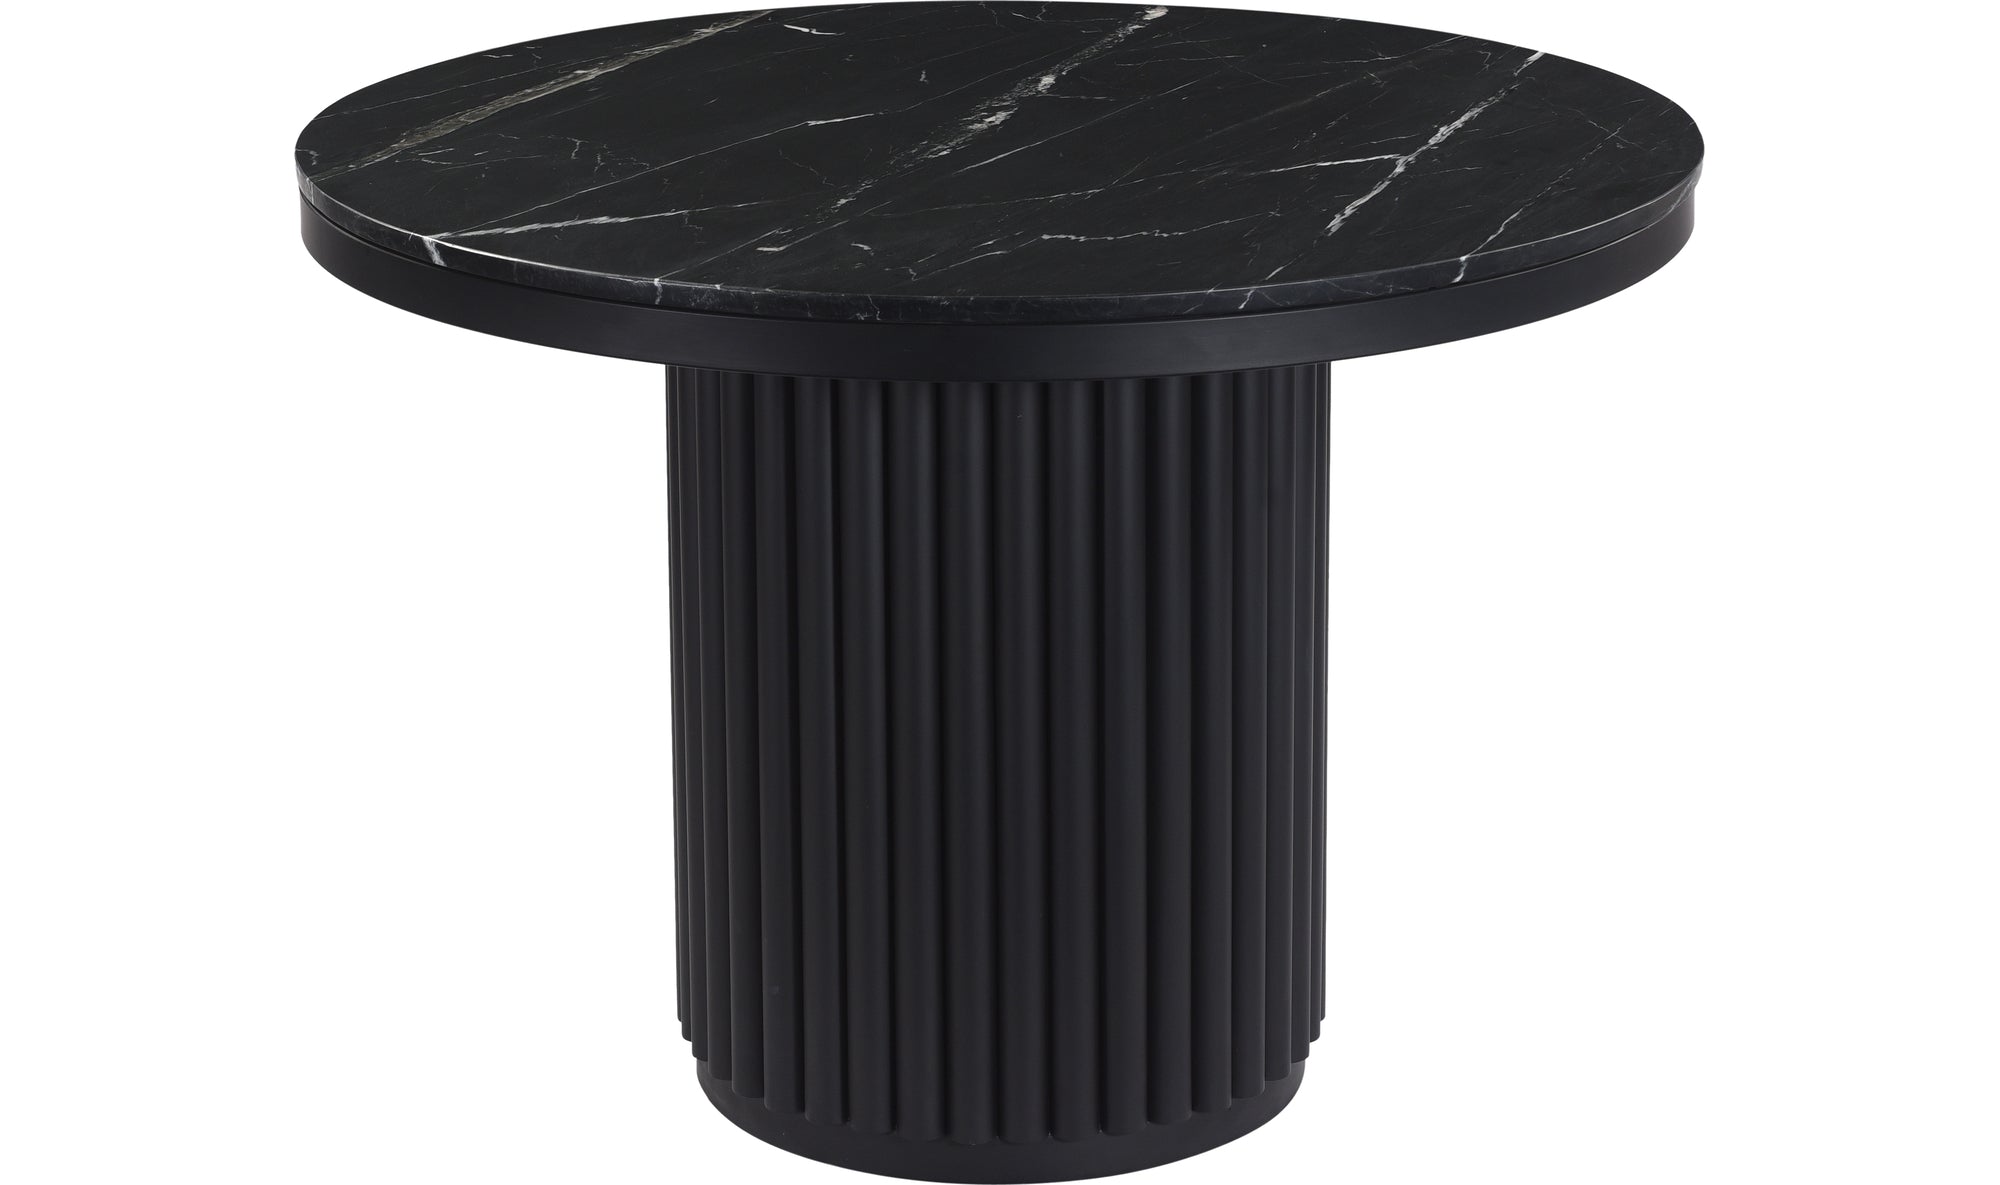 Tower Black Marble Dining Table